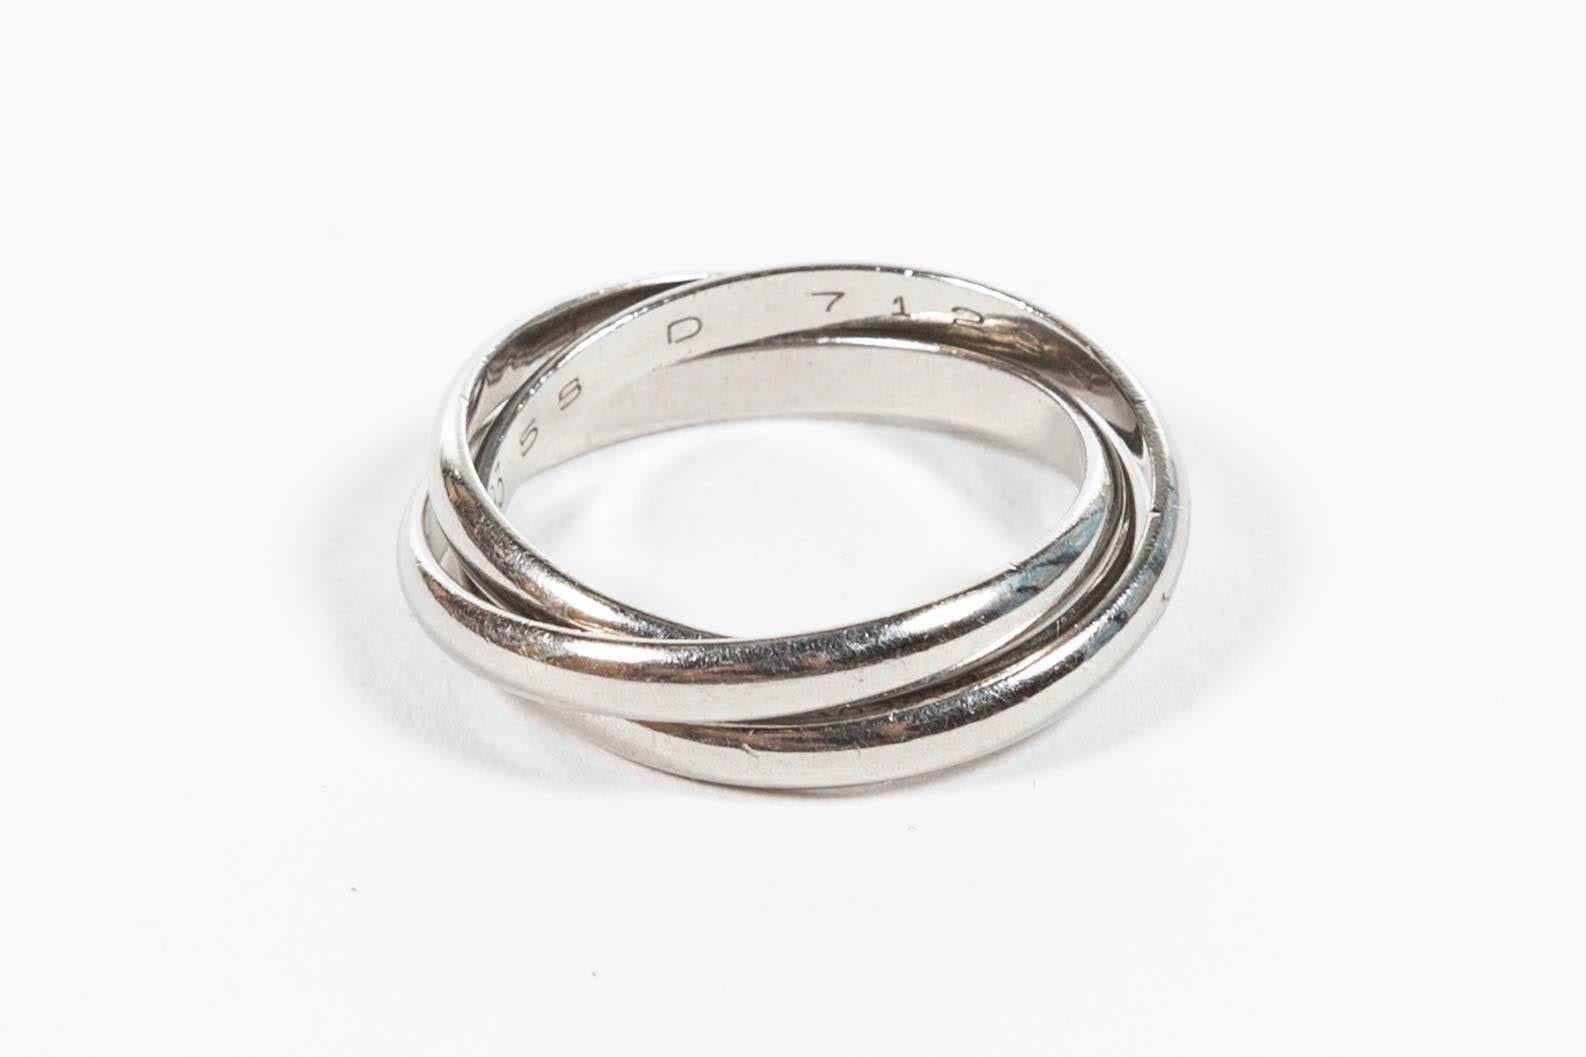 The iconic Cartier Trinity ring, Classic three-band rolling ring. All platinum (rare). Comes with Cartier box. Size 9.5.